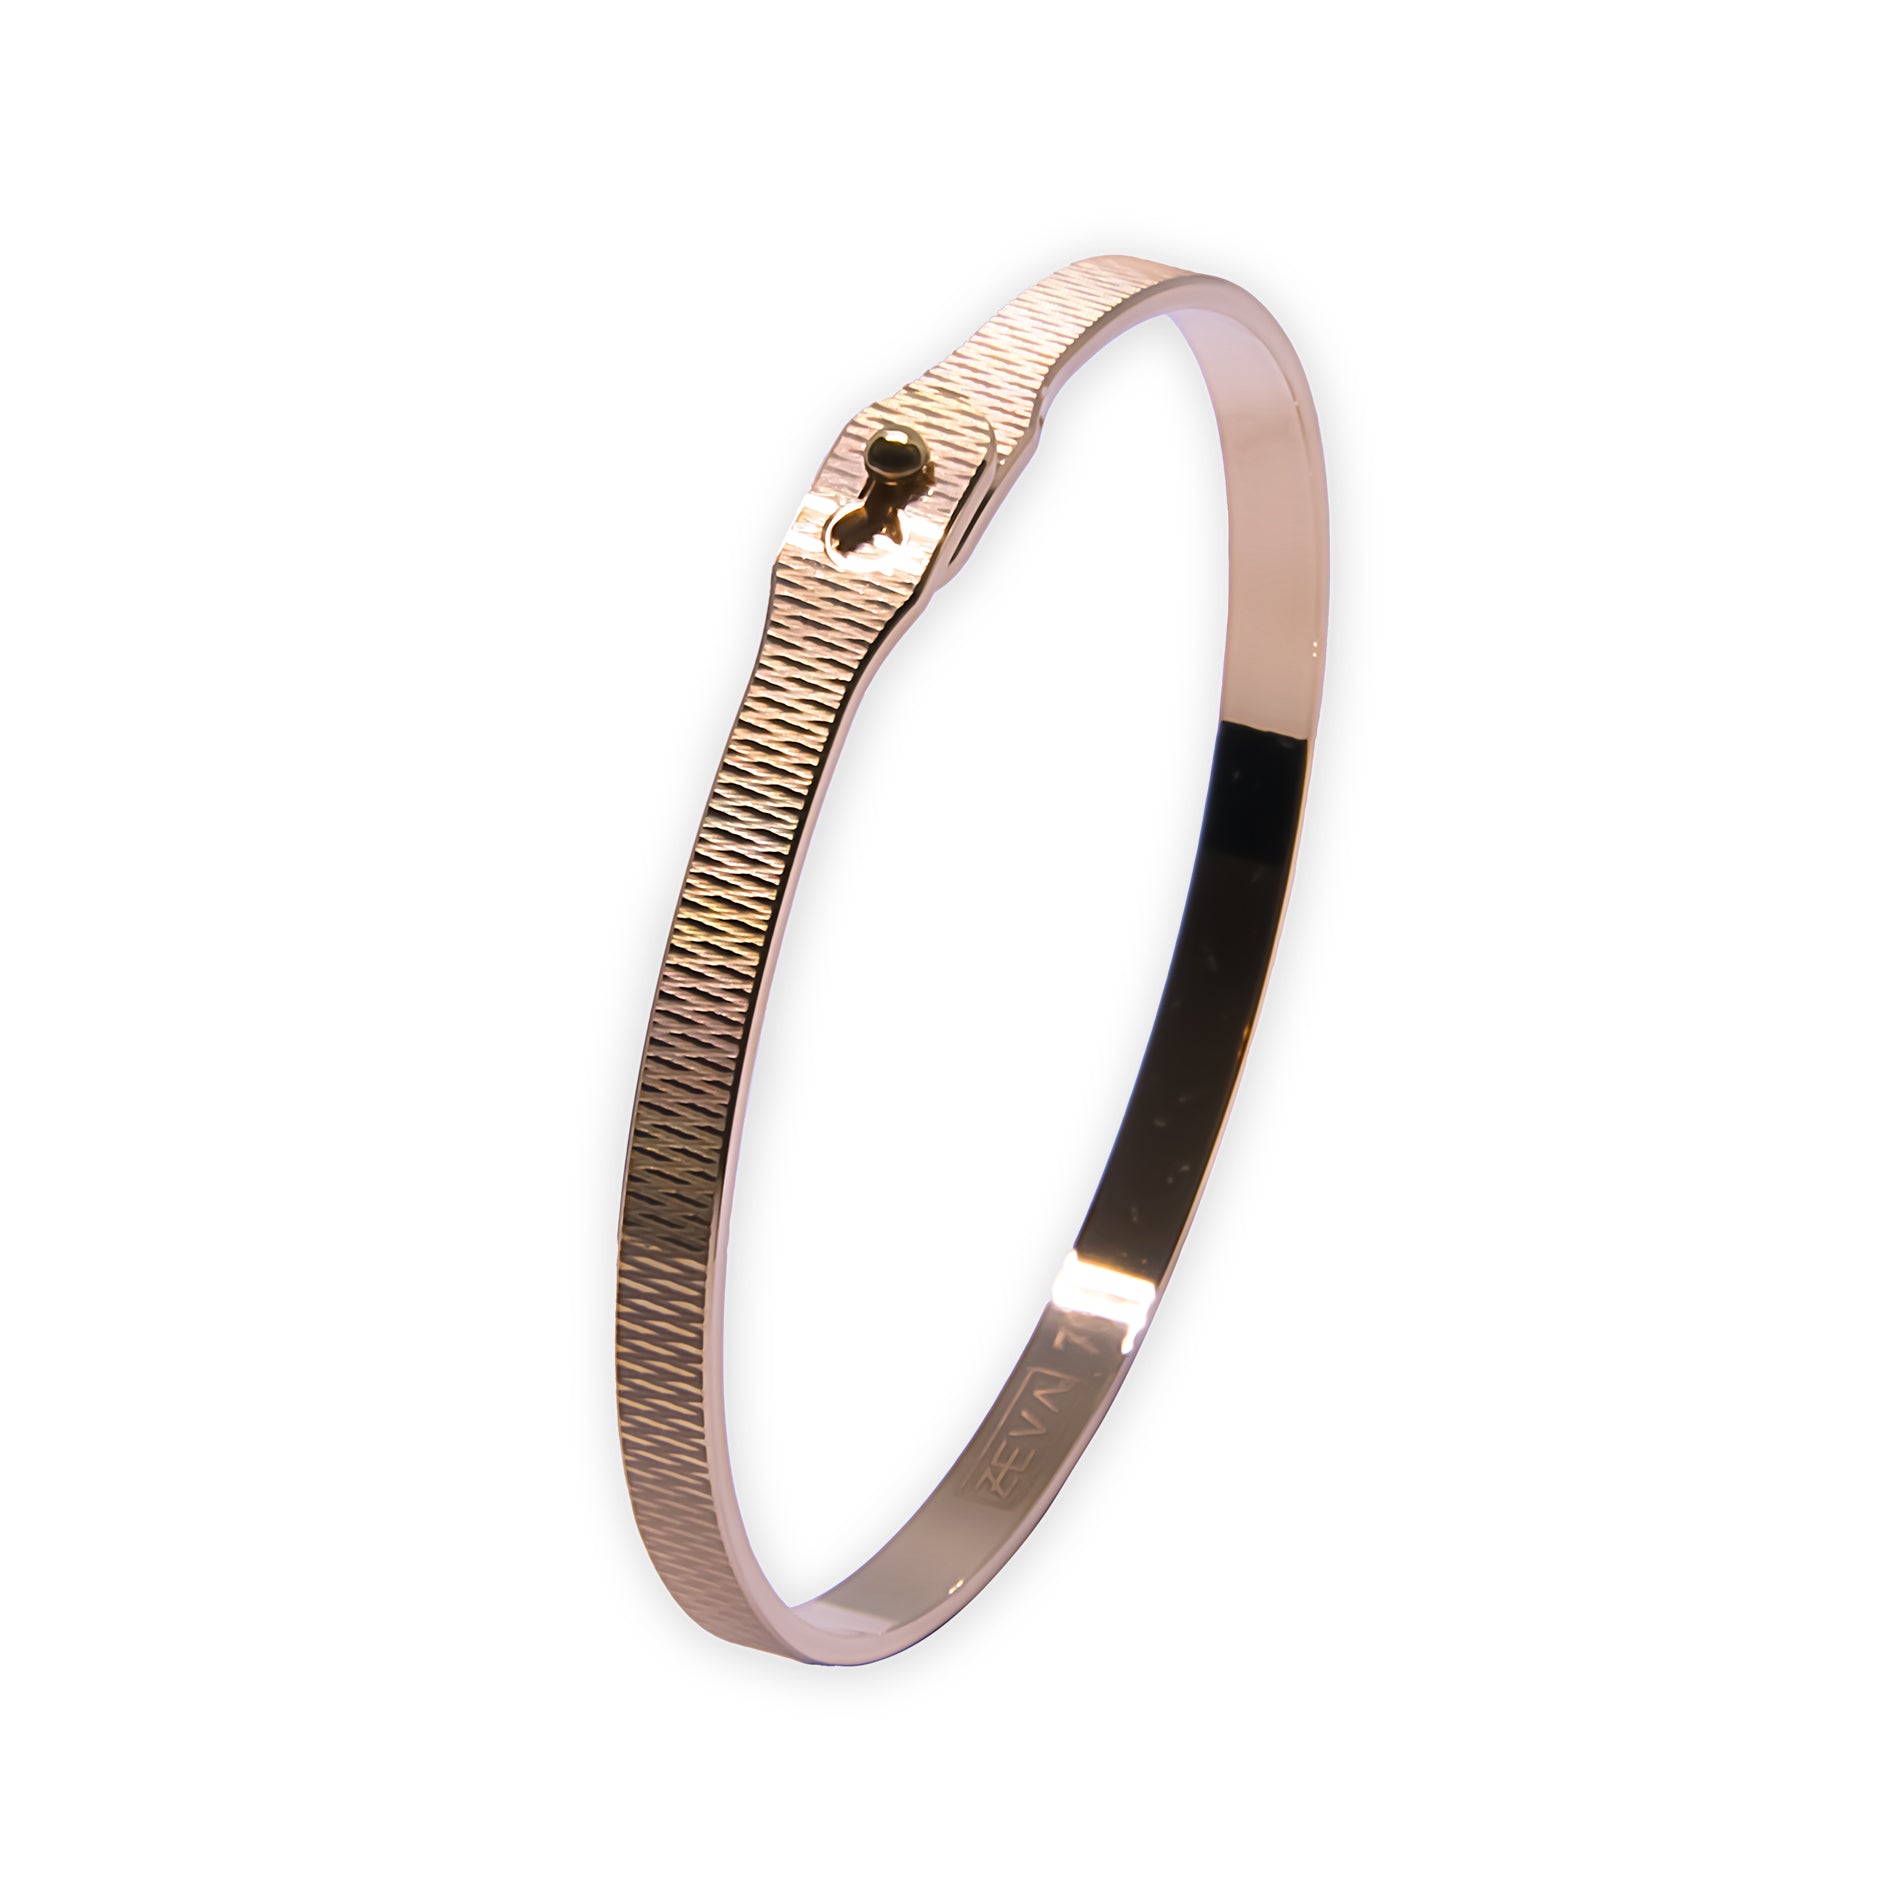 Bracelet STRETCH 4mm flexible with pin claps red gold 18k 750